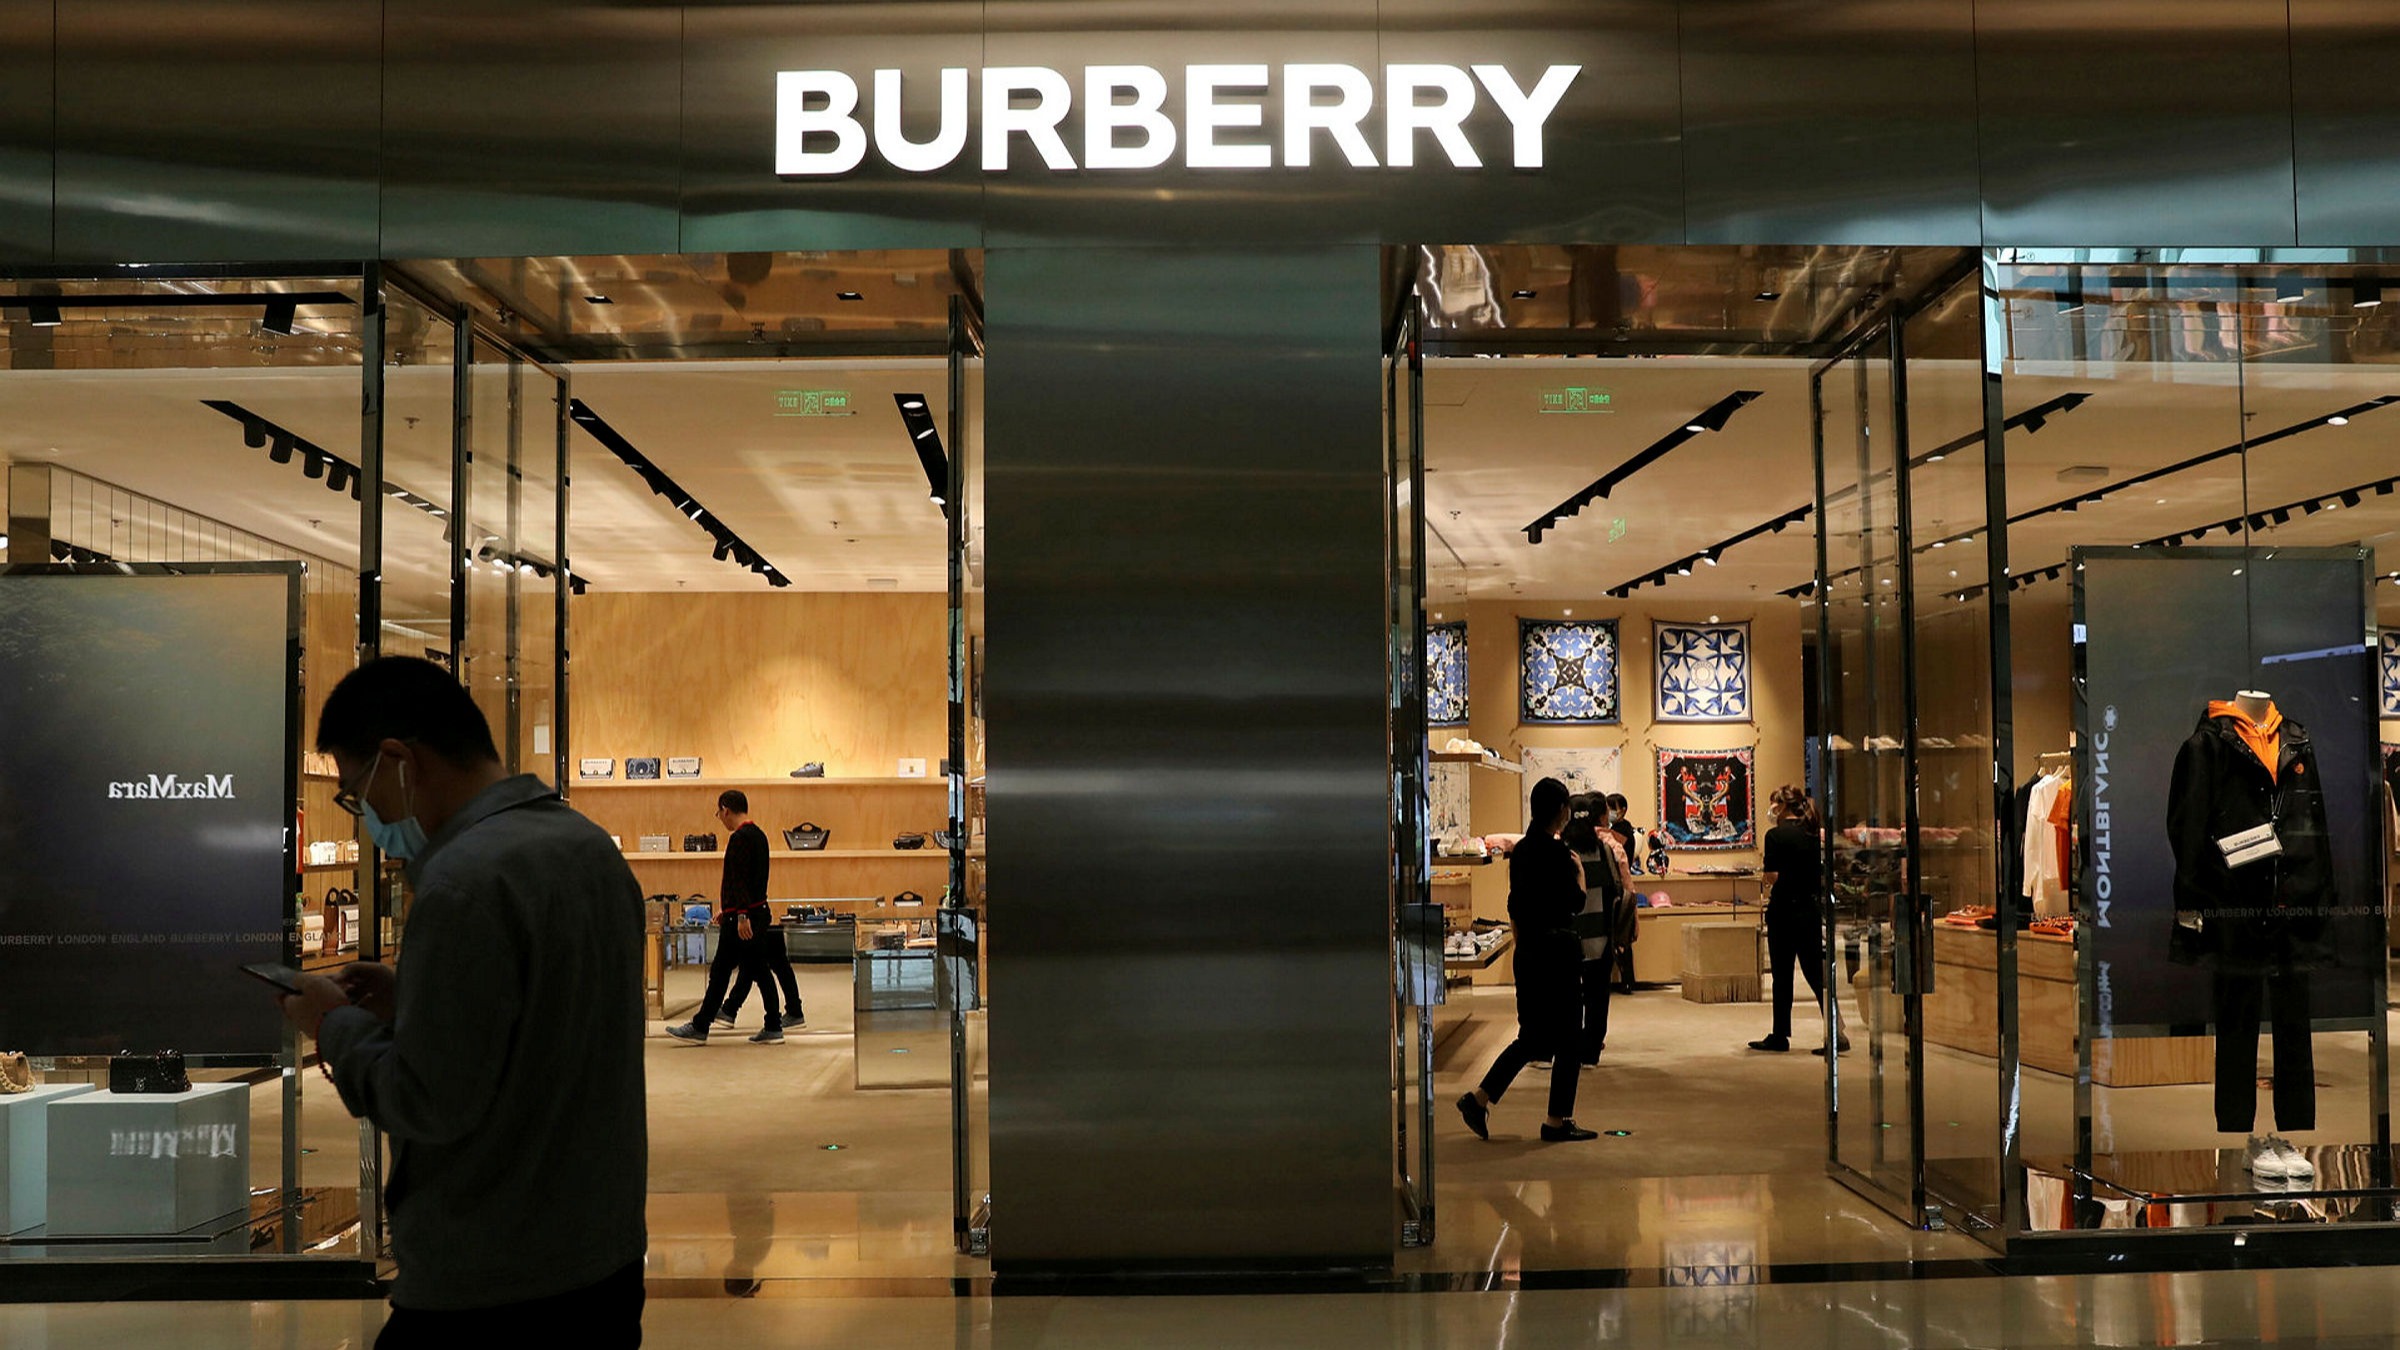 Burberry reinstates dividend as revenues start to recover | Financial Times